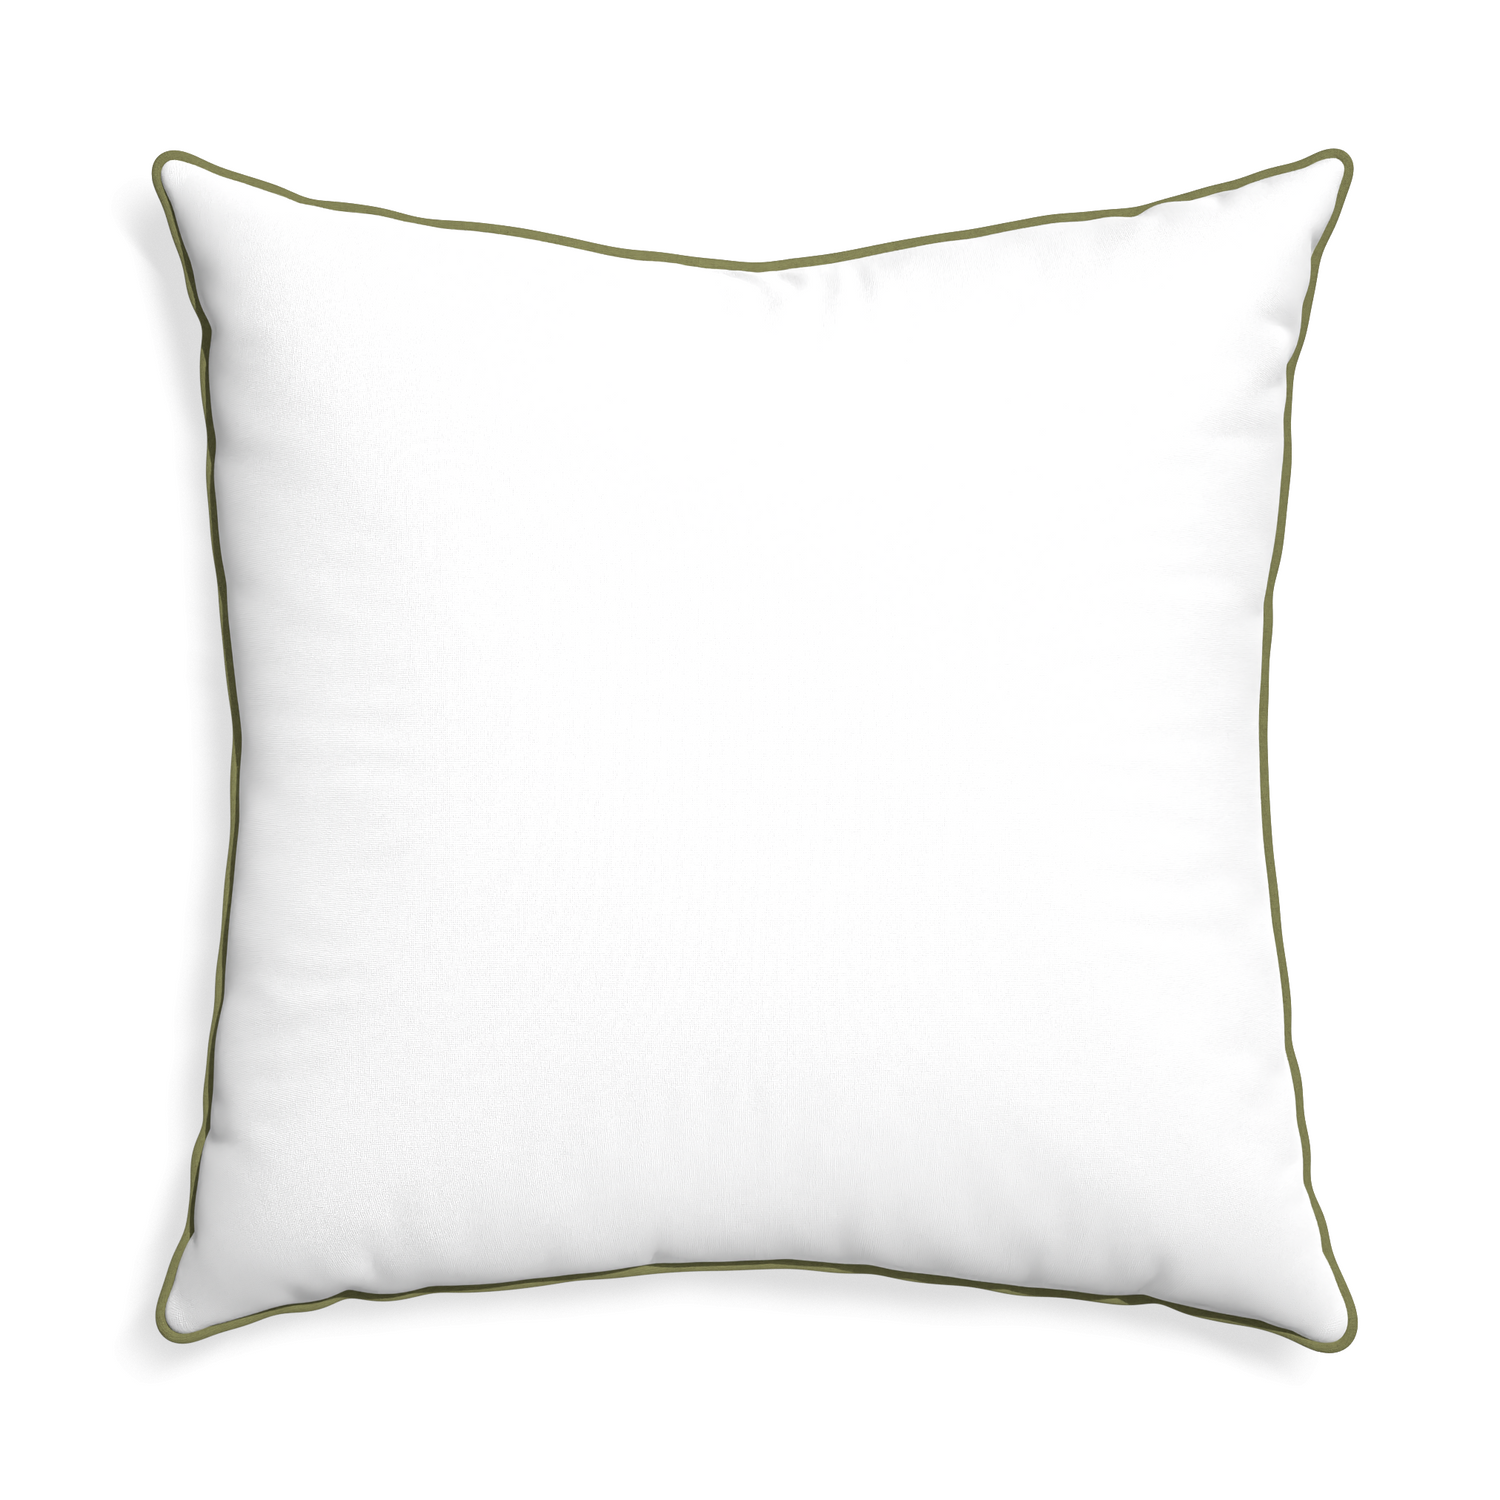 Euro-sham snow custom pillow with moss piping on white background